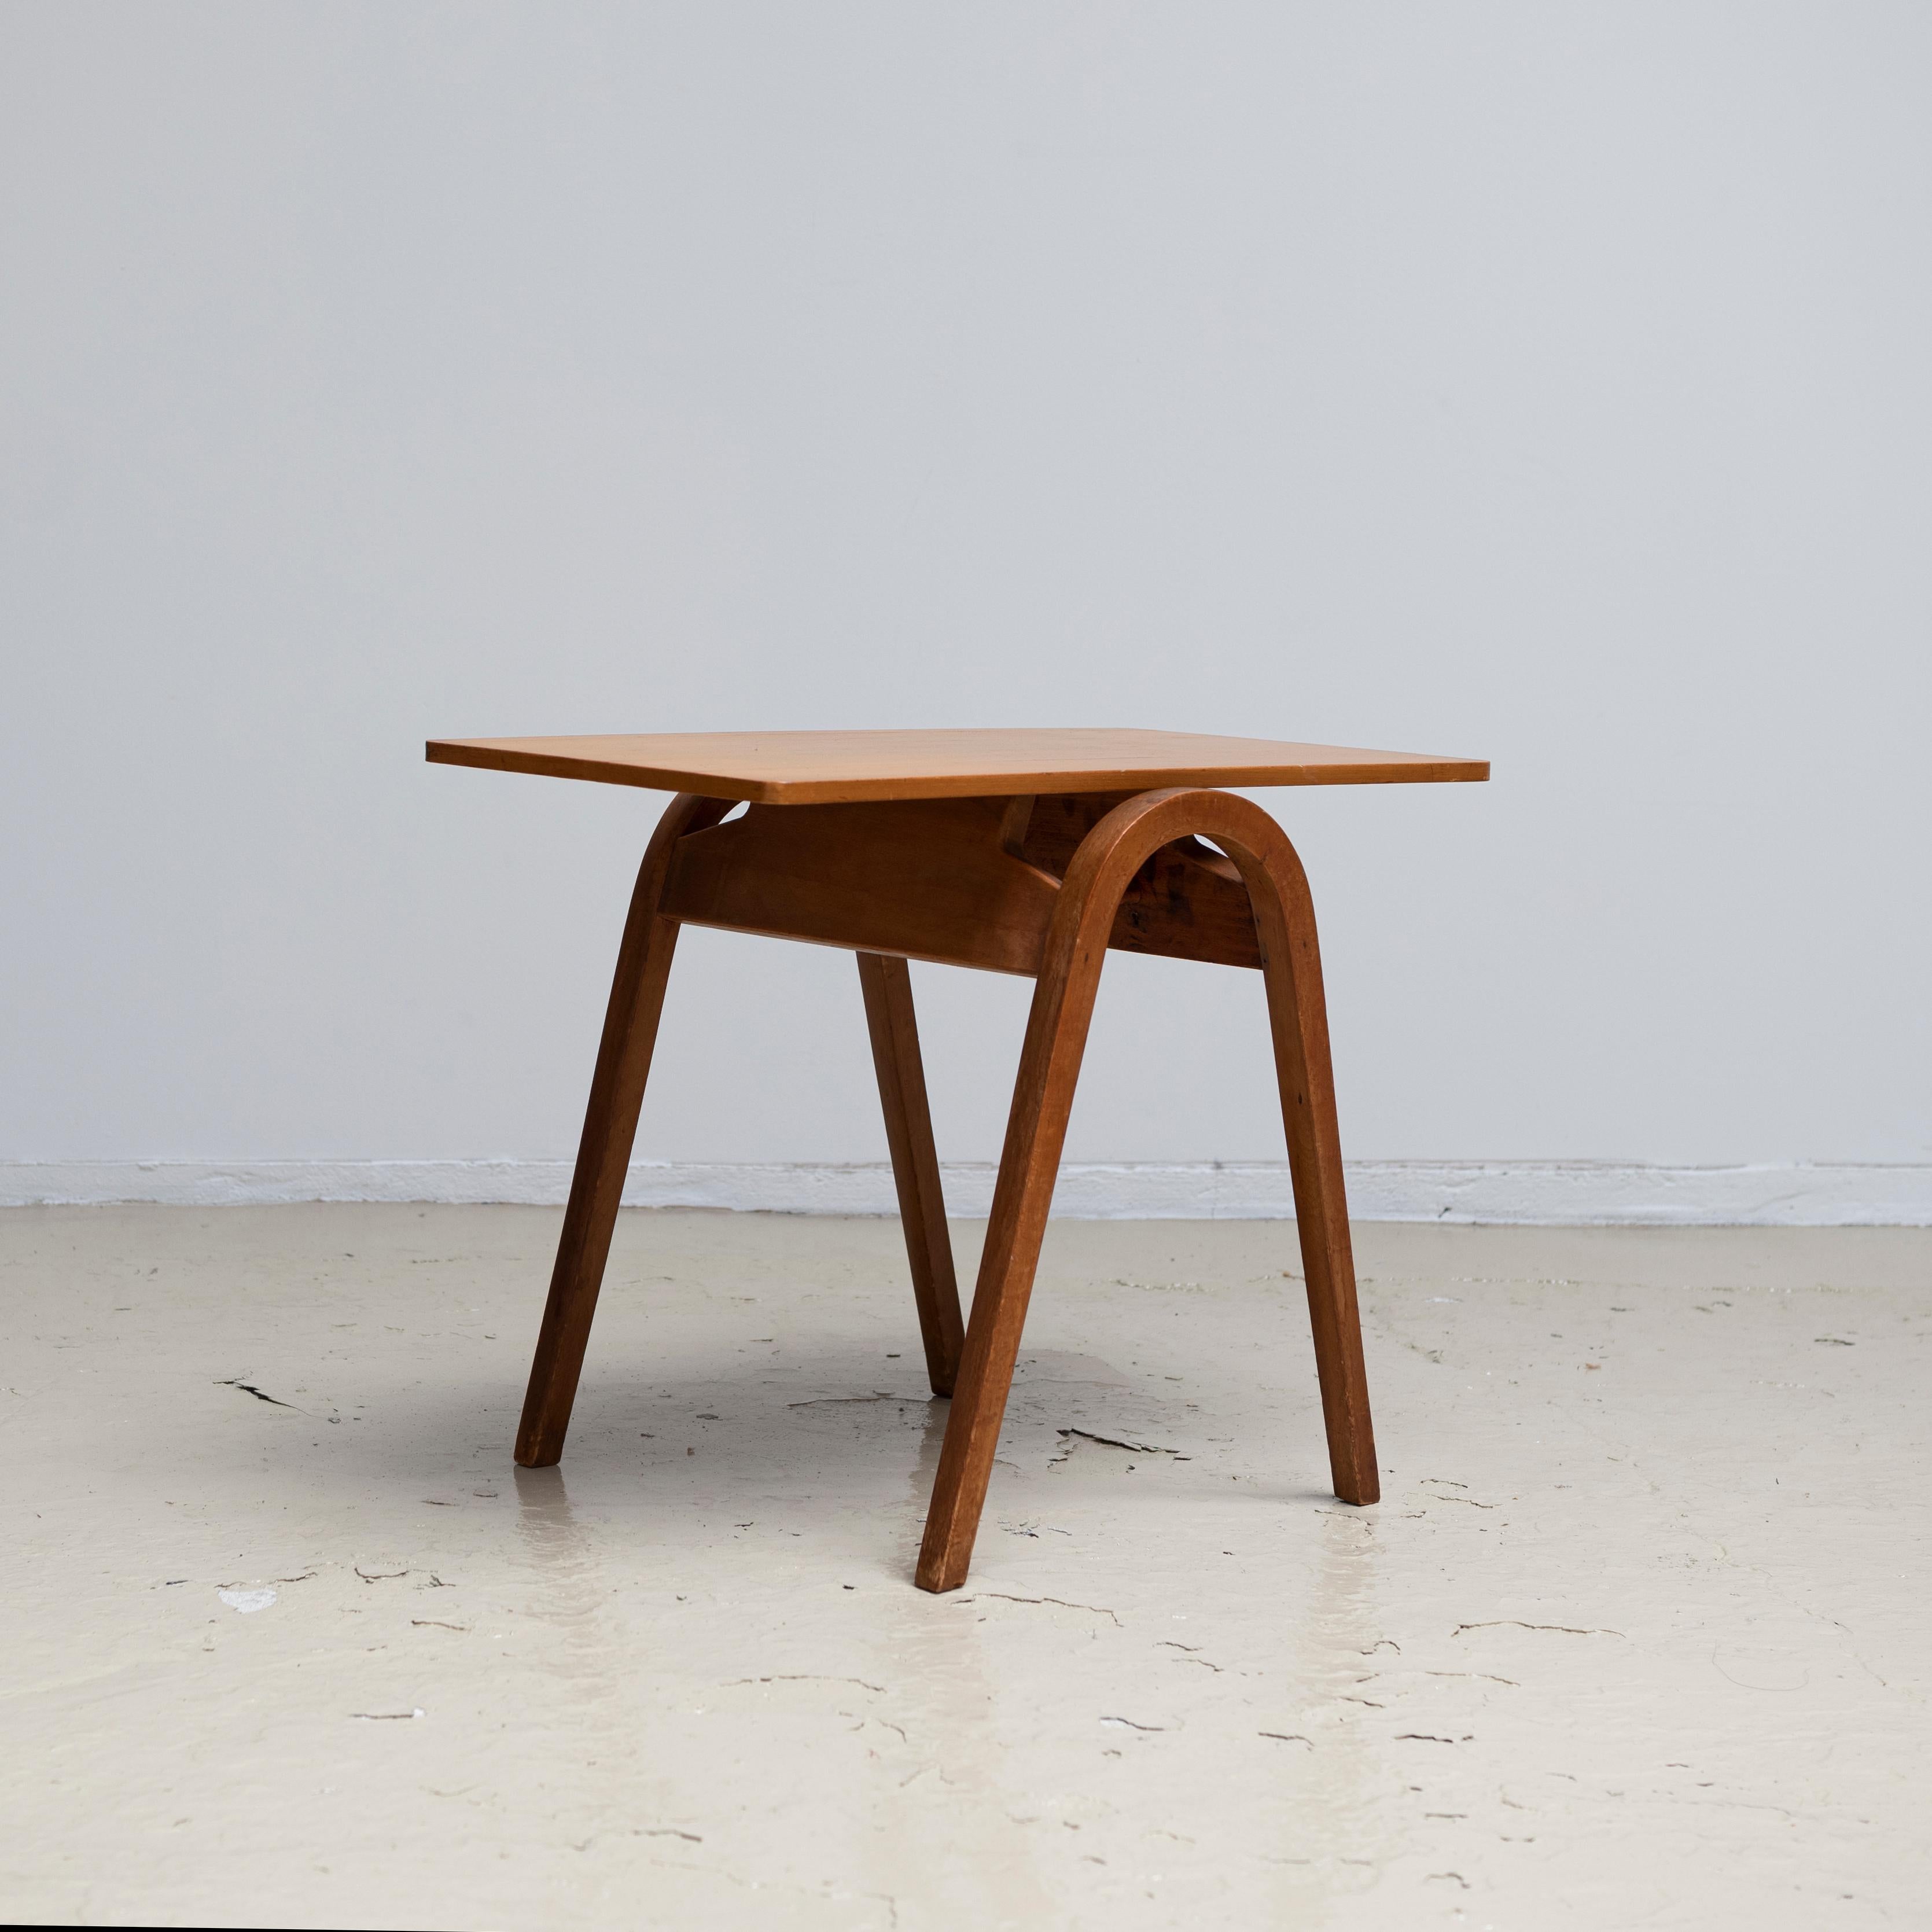 T-202 side table. Circa 1970s. Manufactured by Akita Mokko.
T-202 side table was made by Kenmochi Design Associate, that was established by Isamu Kenmochi in 1955, redesigning Kenmochi's iconic No.202 stool.
The shape of legs of T-202 side table